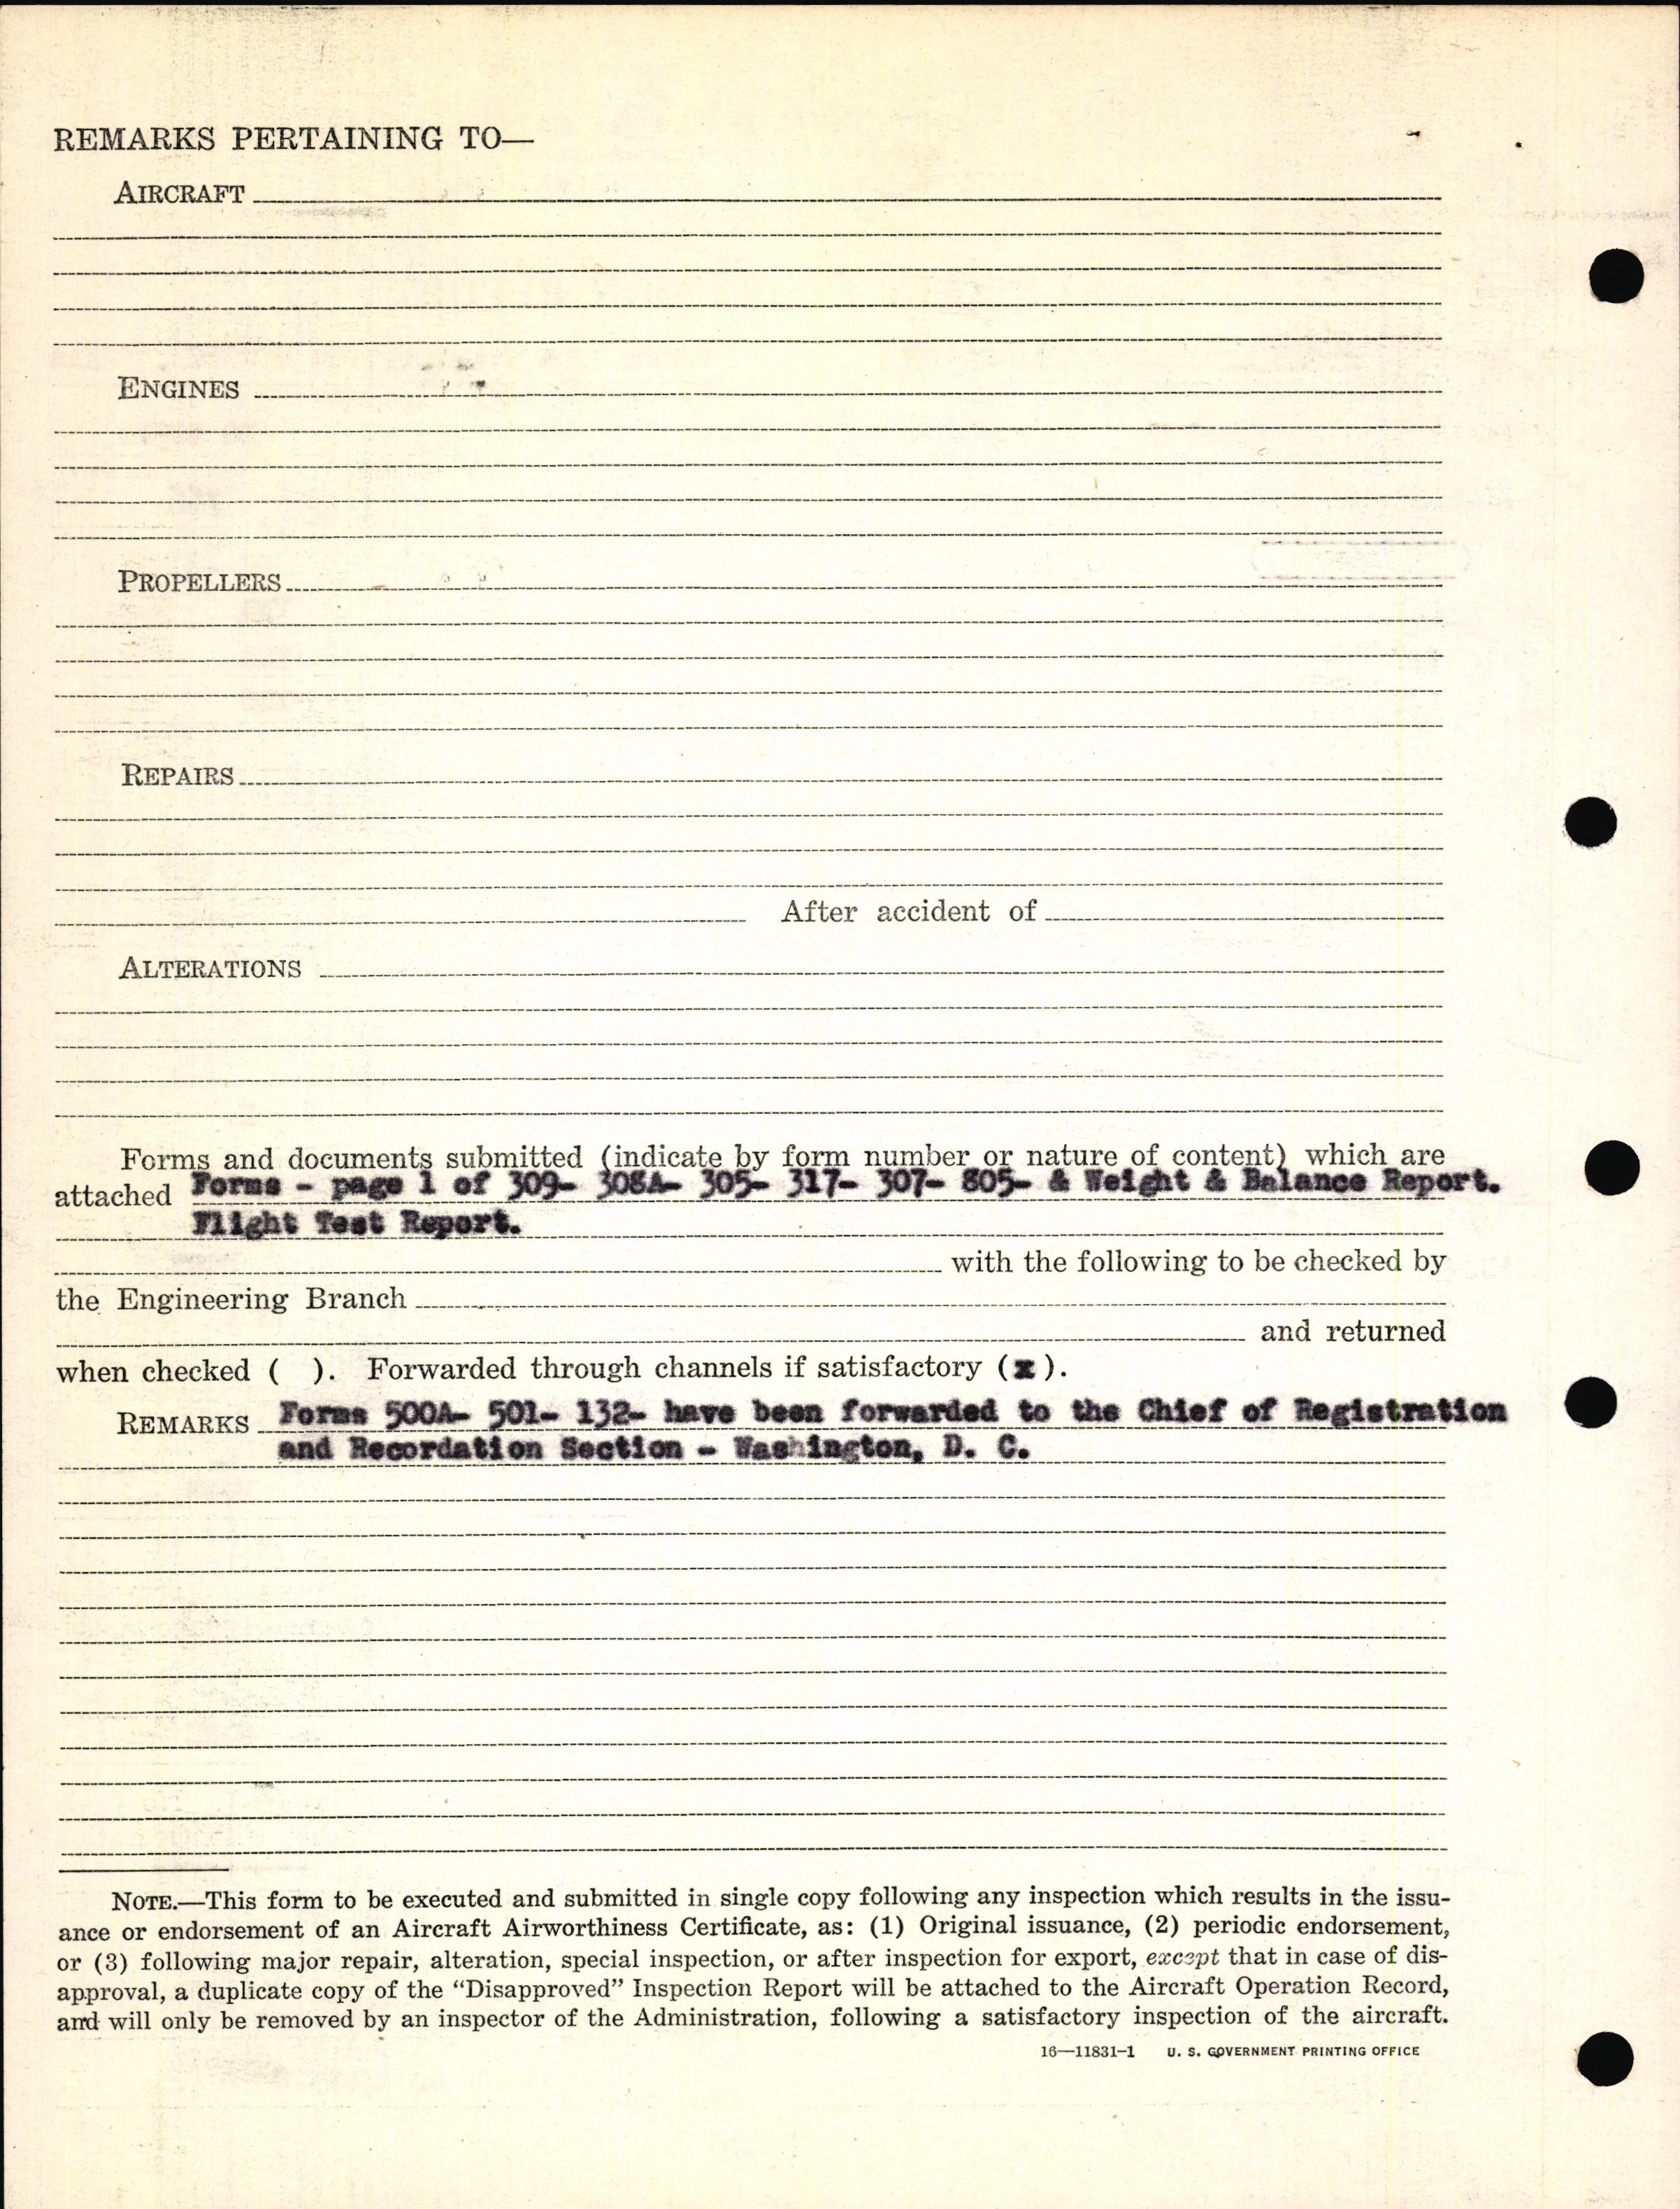 Sample page 6 from AirCorps Library document: Technical Information for Serial Number 13